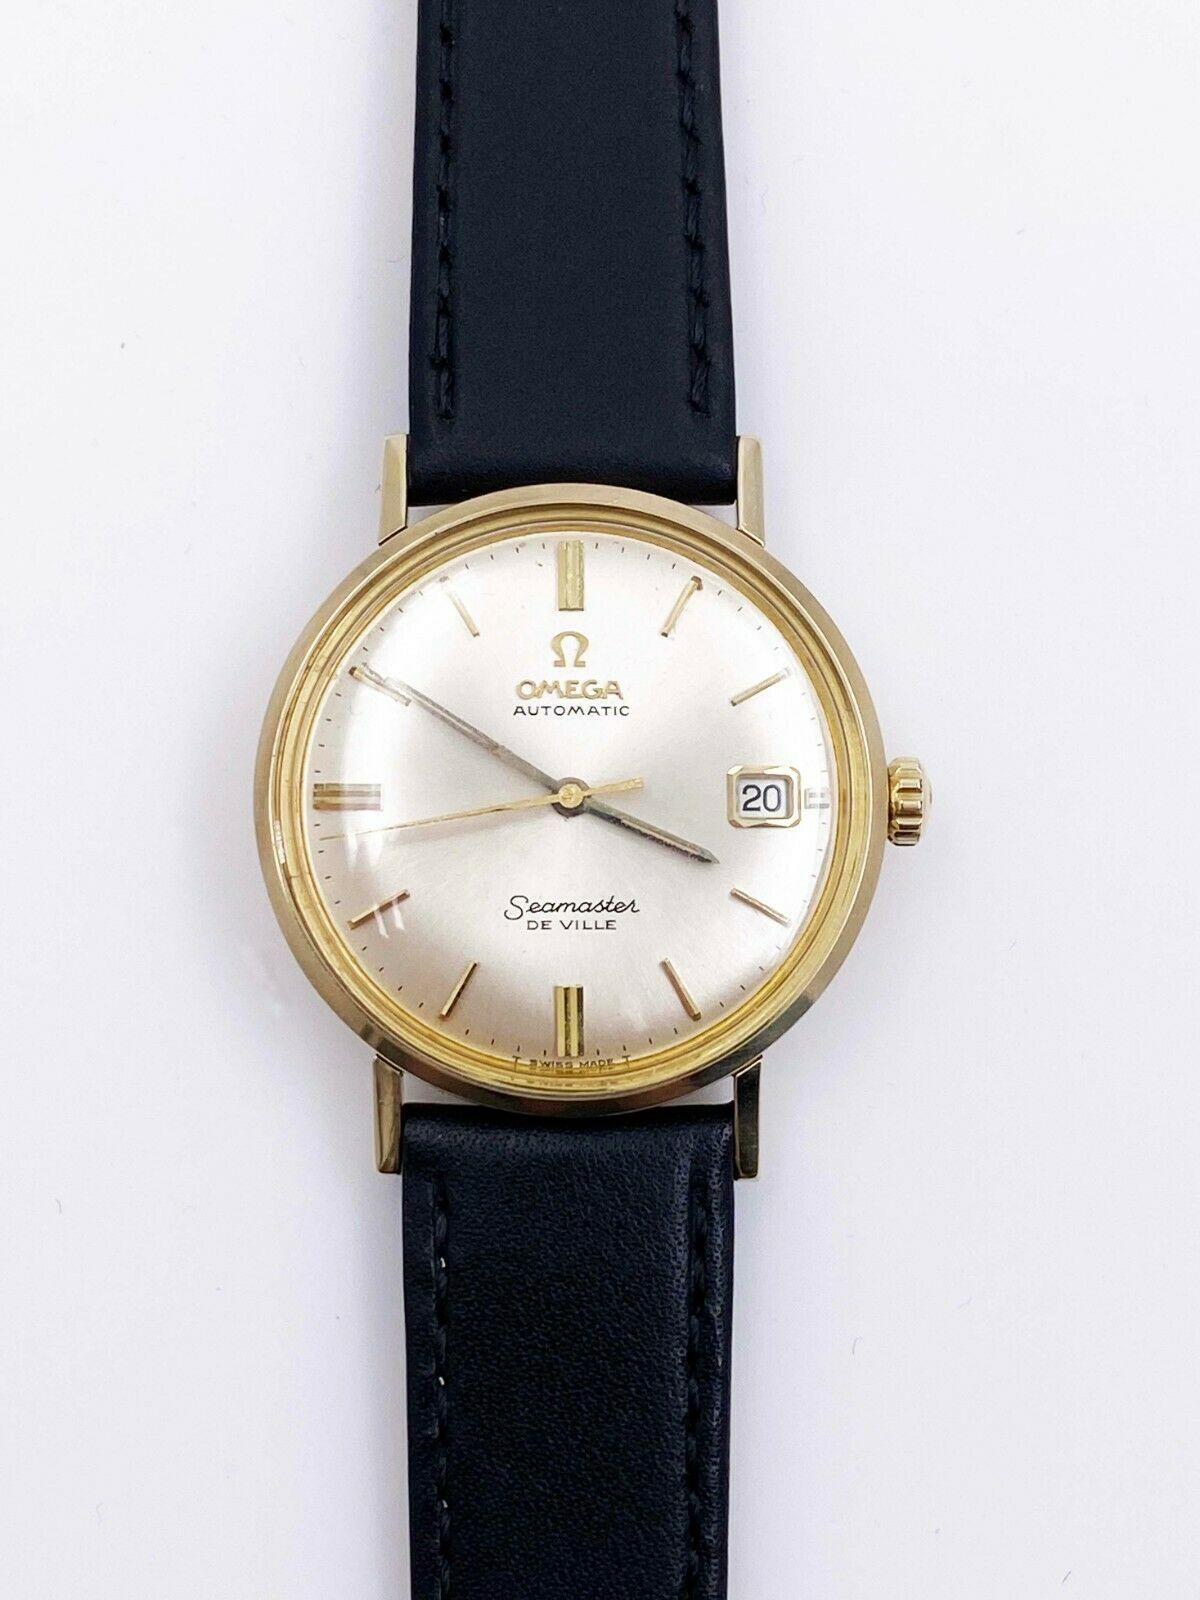 Model: Omega Seamaster De Ville

 

Case Material: Stainless Steel

 

Band: Custom Leather Band

 

Bezel: 14K Yellow Gold

 

Dial: Champagne

 

Face: Sapphire Crystal

 

Case Size: 34mm

 

Includes: 

-Elegant Watch Box

-Certified Appraisal